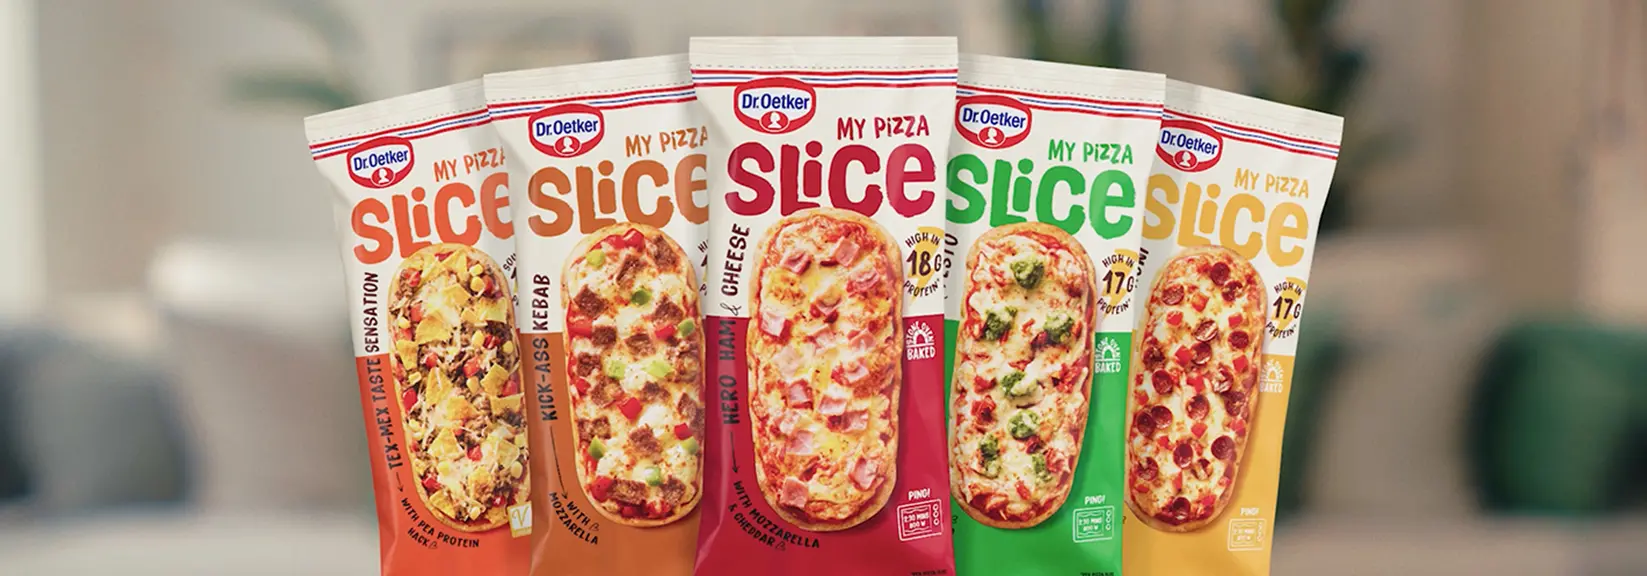 Dr. Oetker launch with video challenge